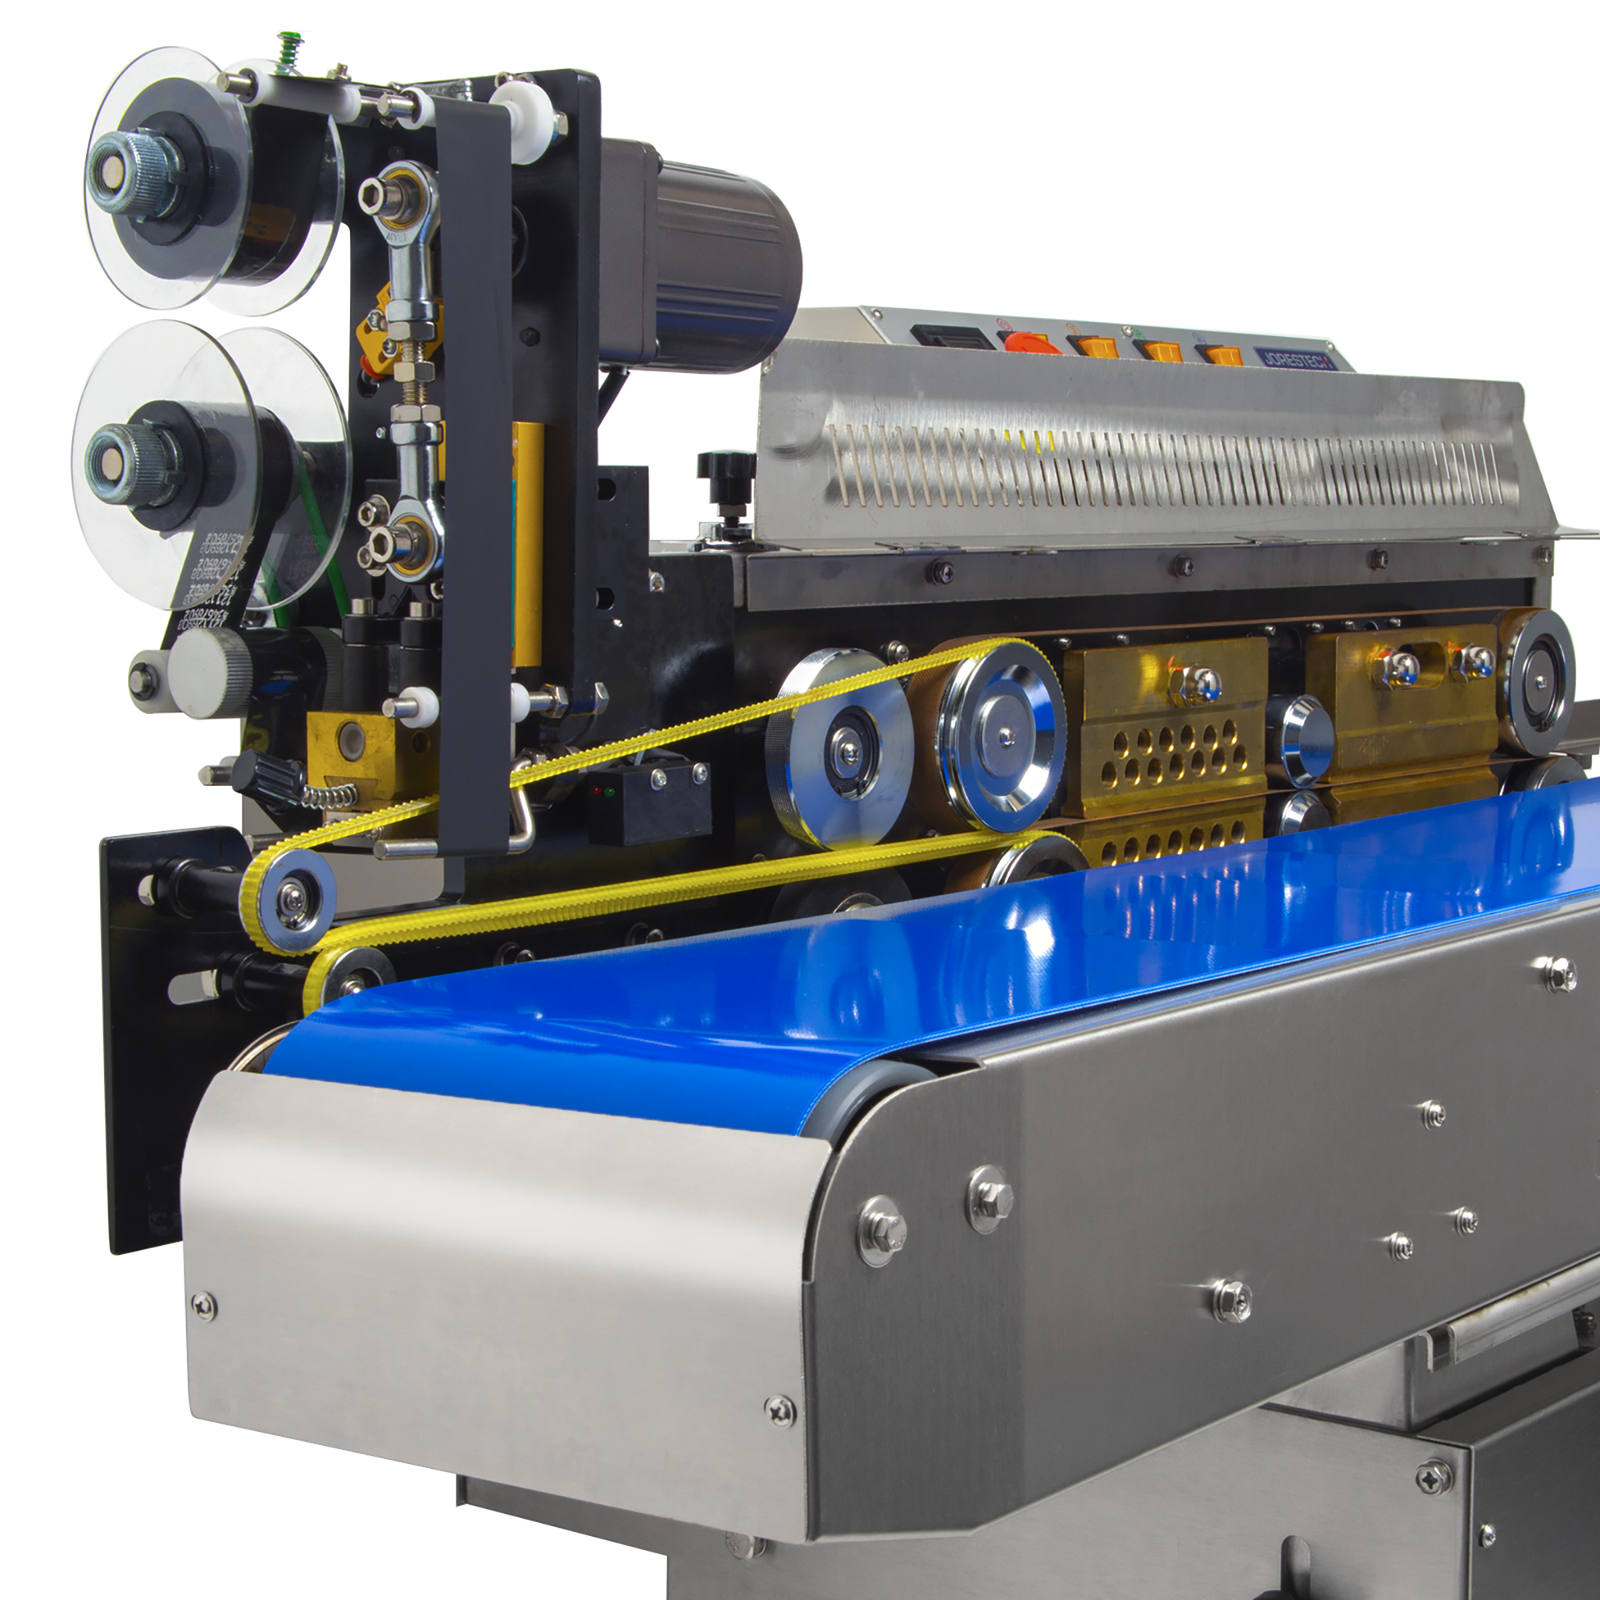 Close up view of the hot stamp coder integrated to the JORES TECHNOLOGIES® Horizontal continuous band sealer